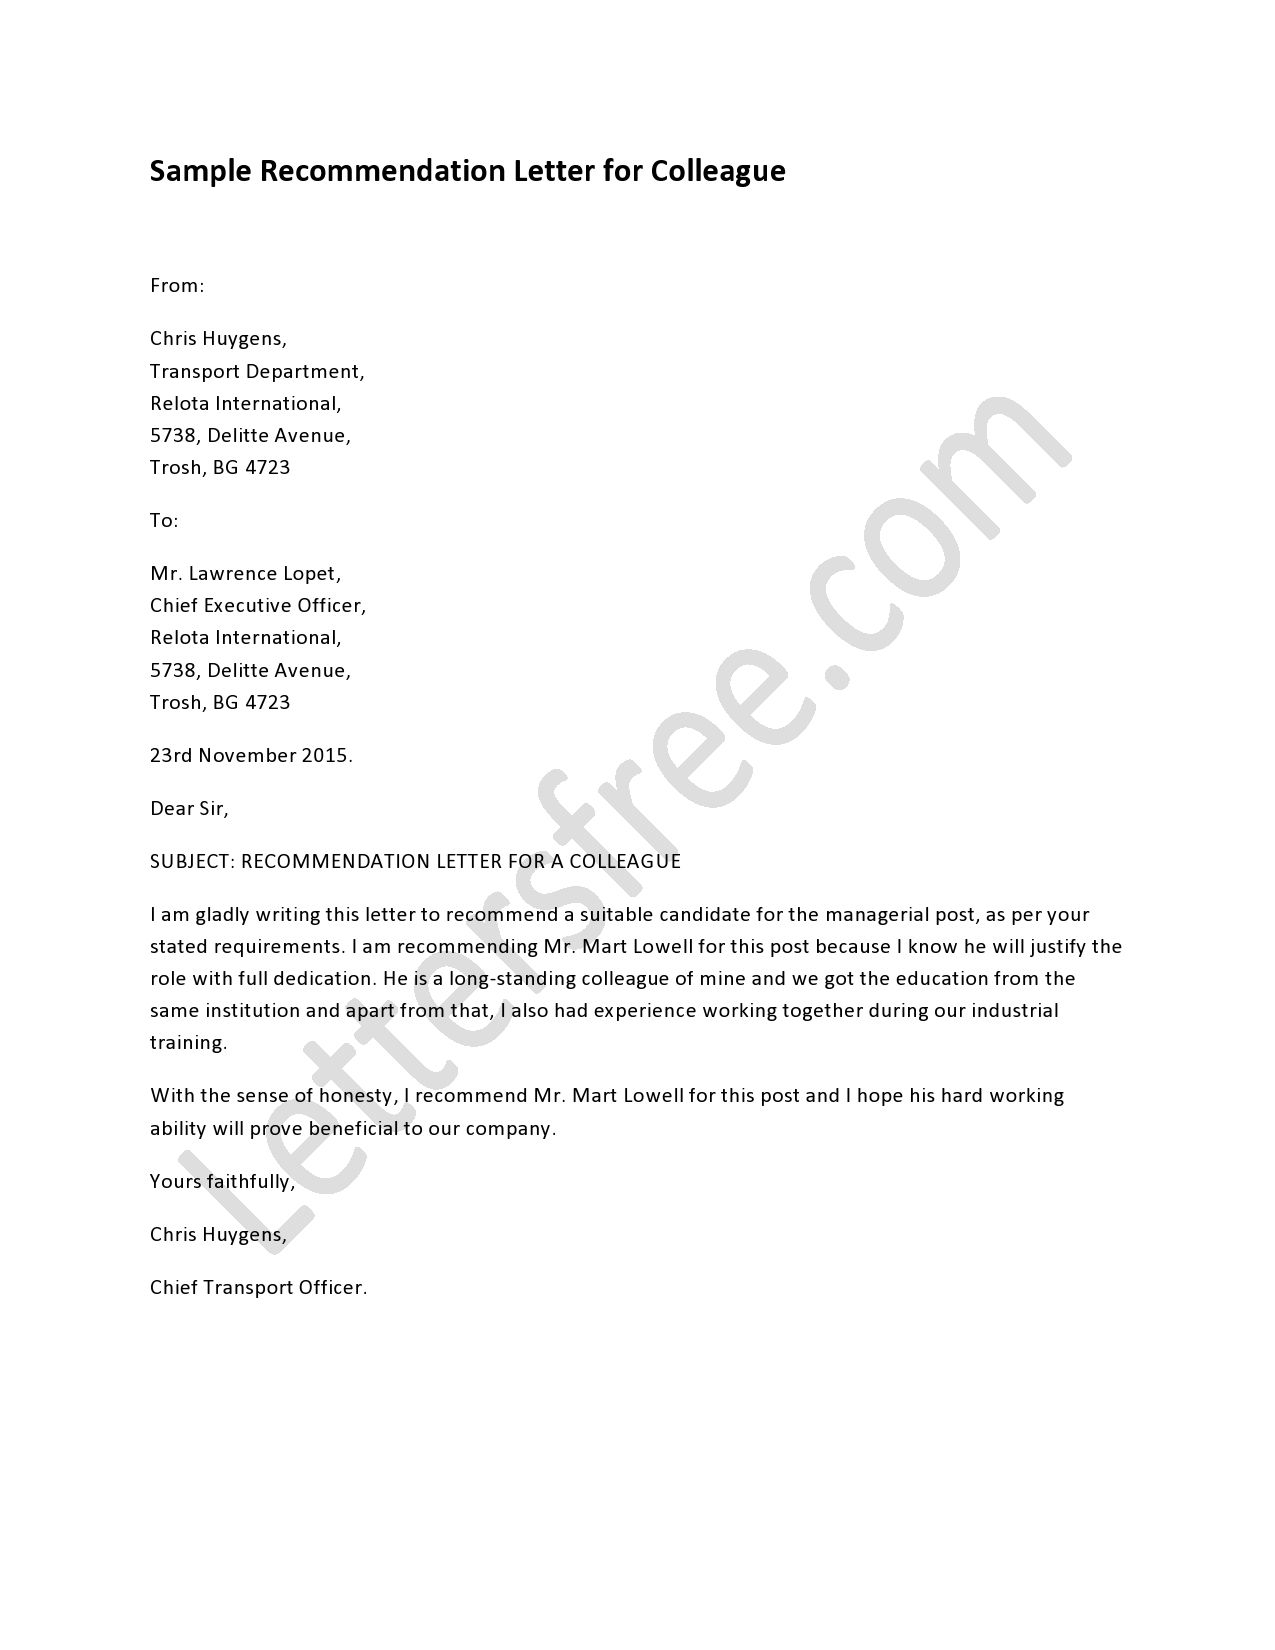 Recommendation Letter For Colleague Lettering Writing A with proportions 1275 X 1650